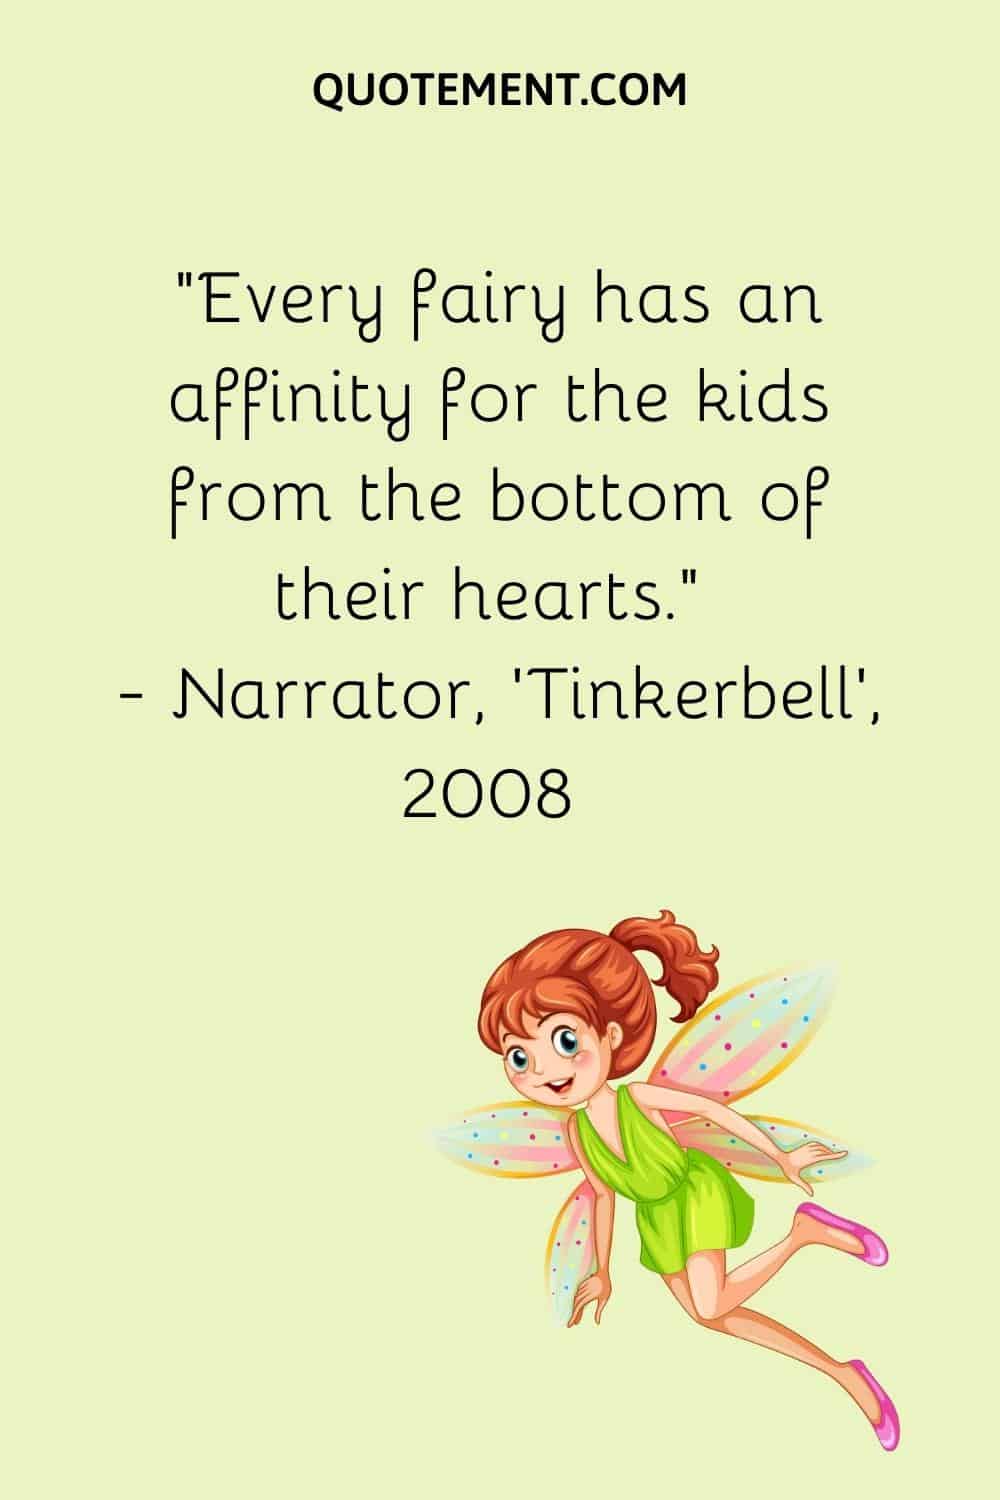 Every fairy has an affinity for the kids from the bottom of their hearts.